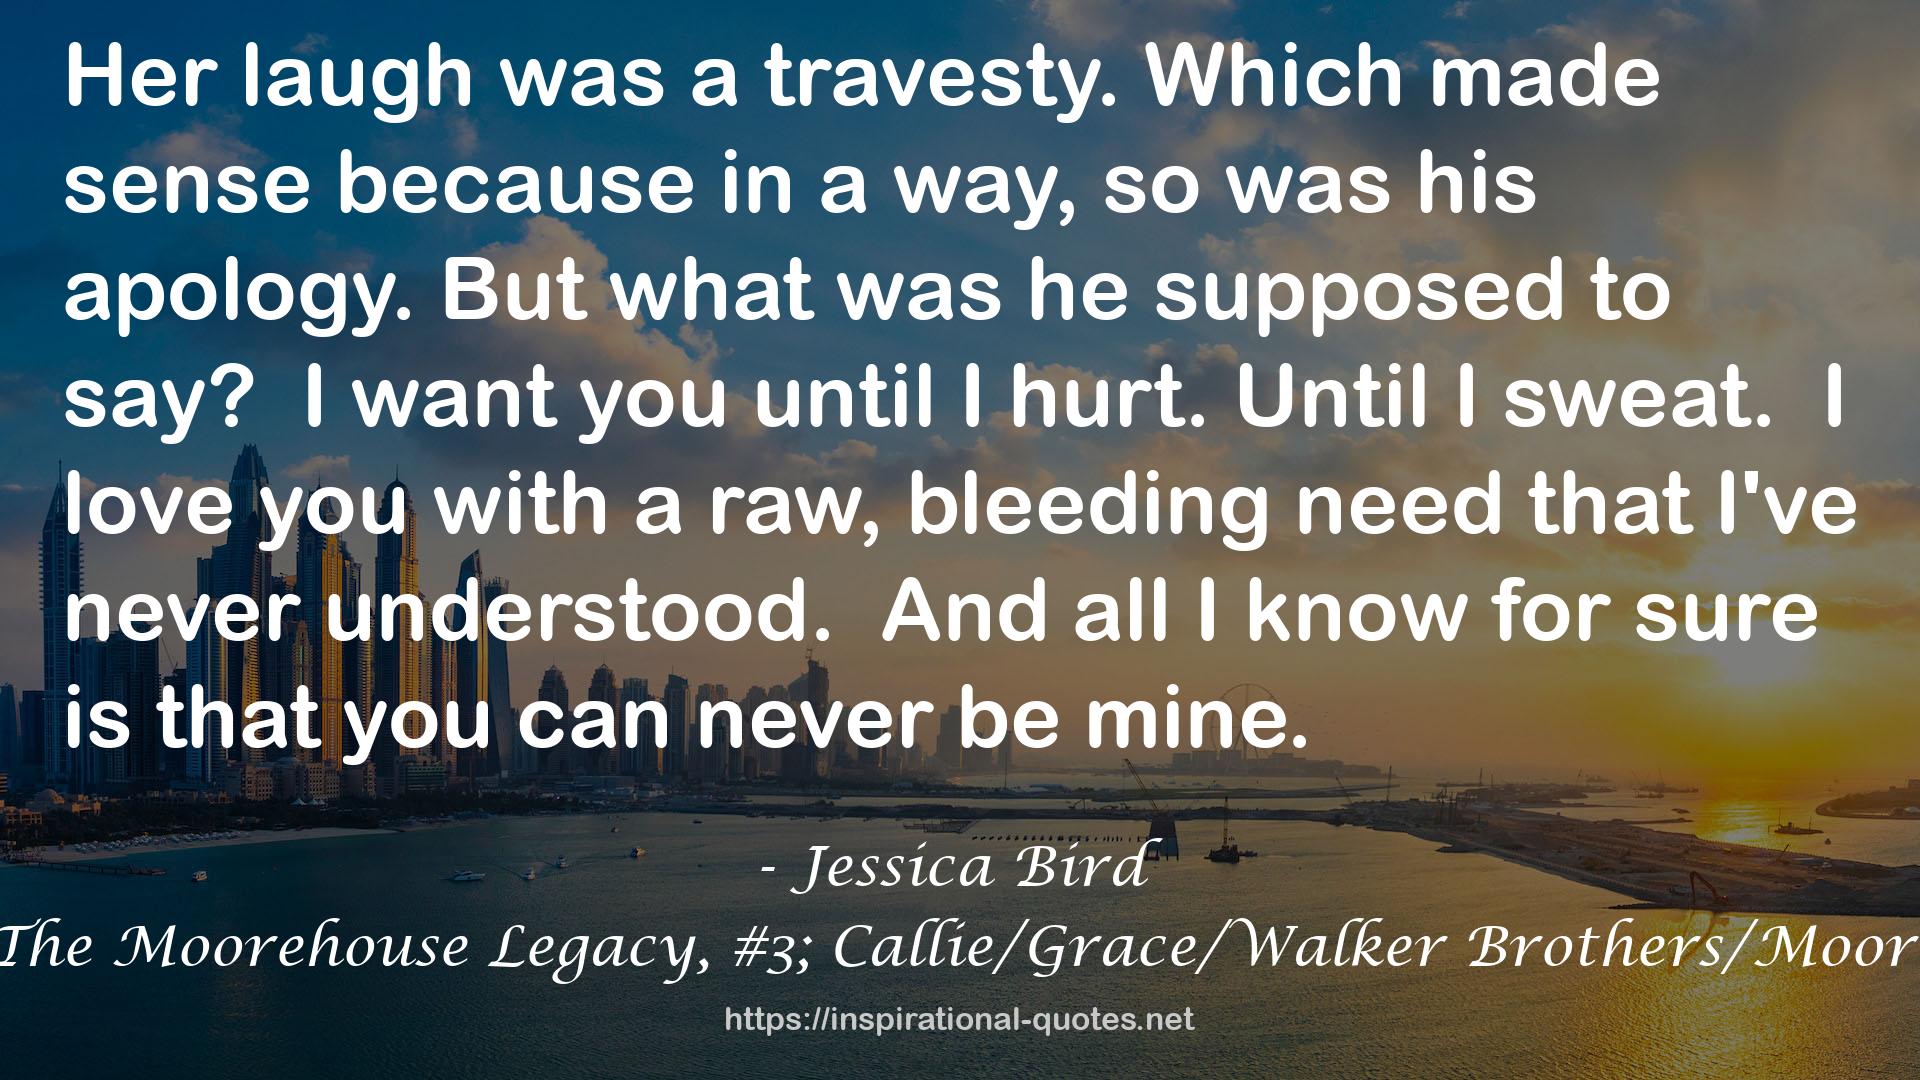 From the First (The Moorehouse Legacy, #3; Callie/Grace/Walker Brothers/Moorehouse series, #6) QUOTES